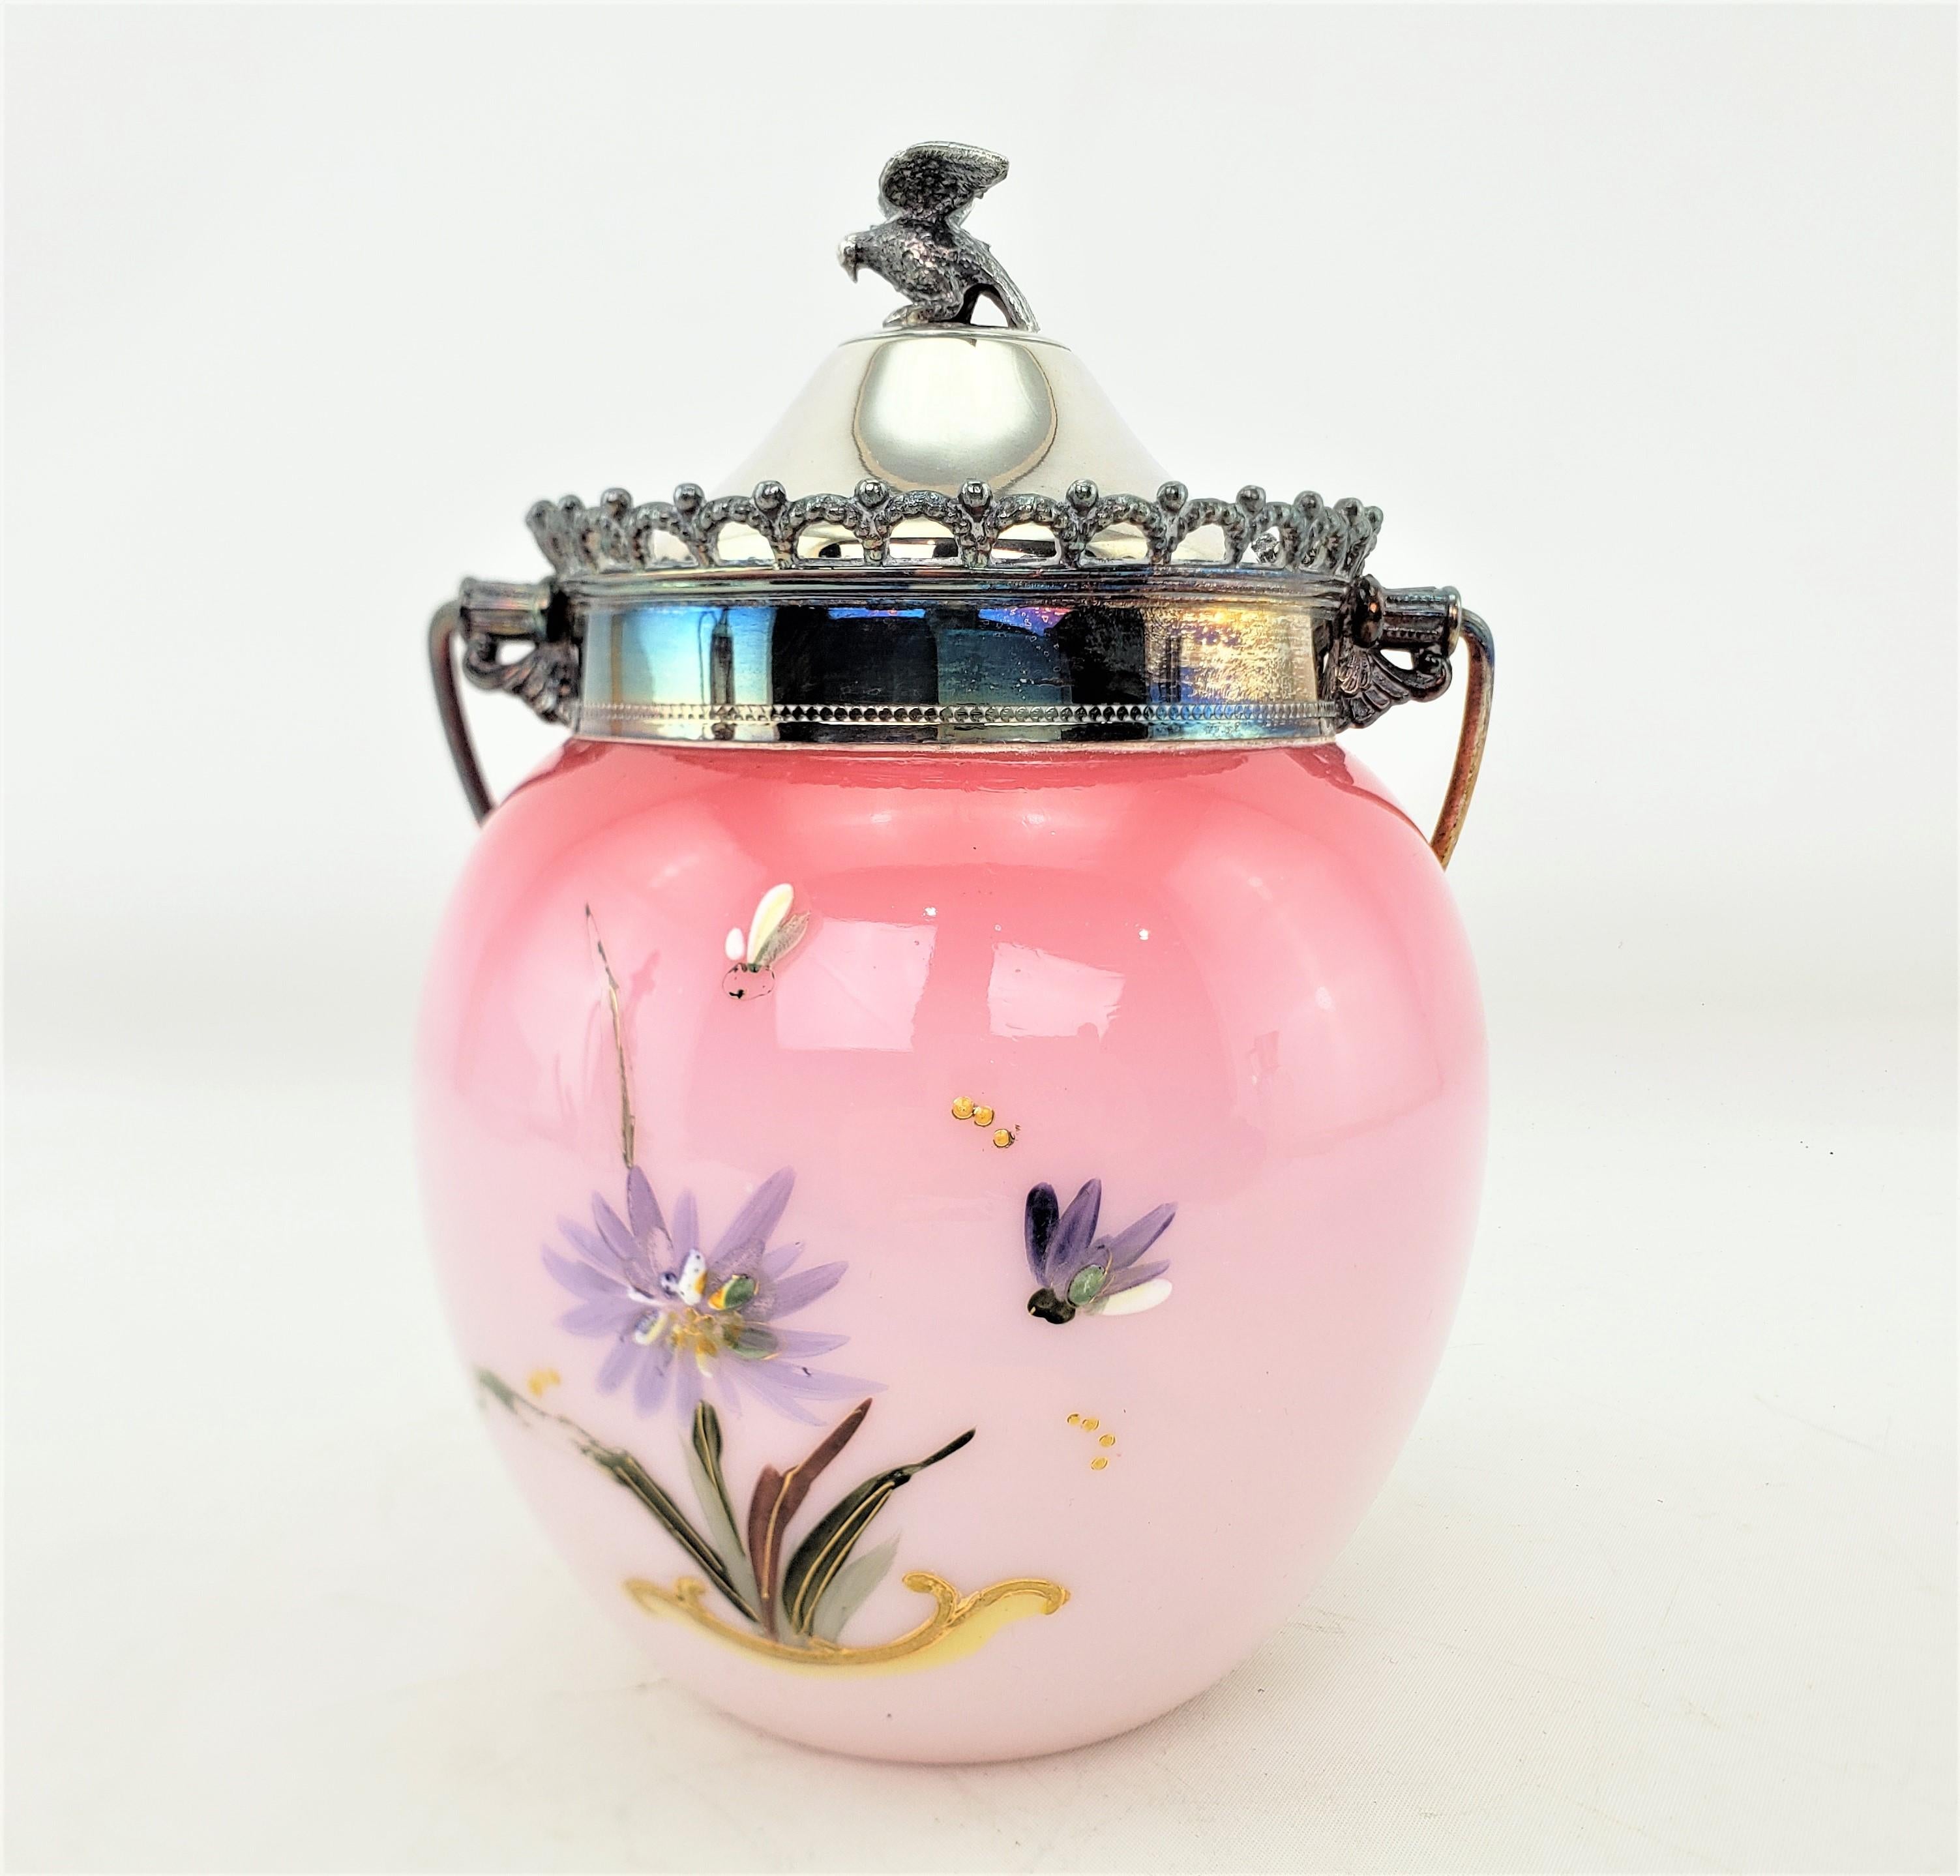 Hand-Crafted Antique Cranberry and Silver Plated Biscuit Barrel with Hand Painted Flowers